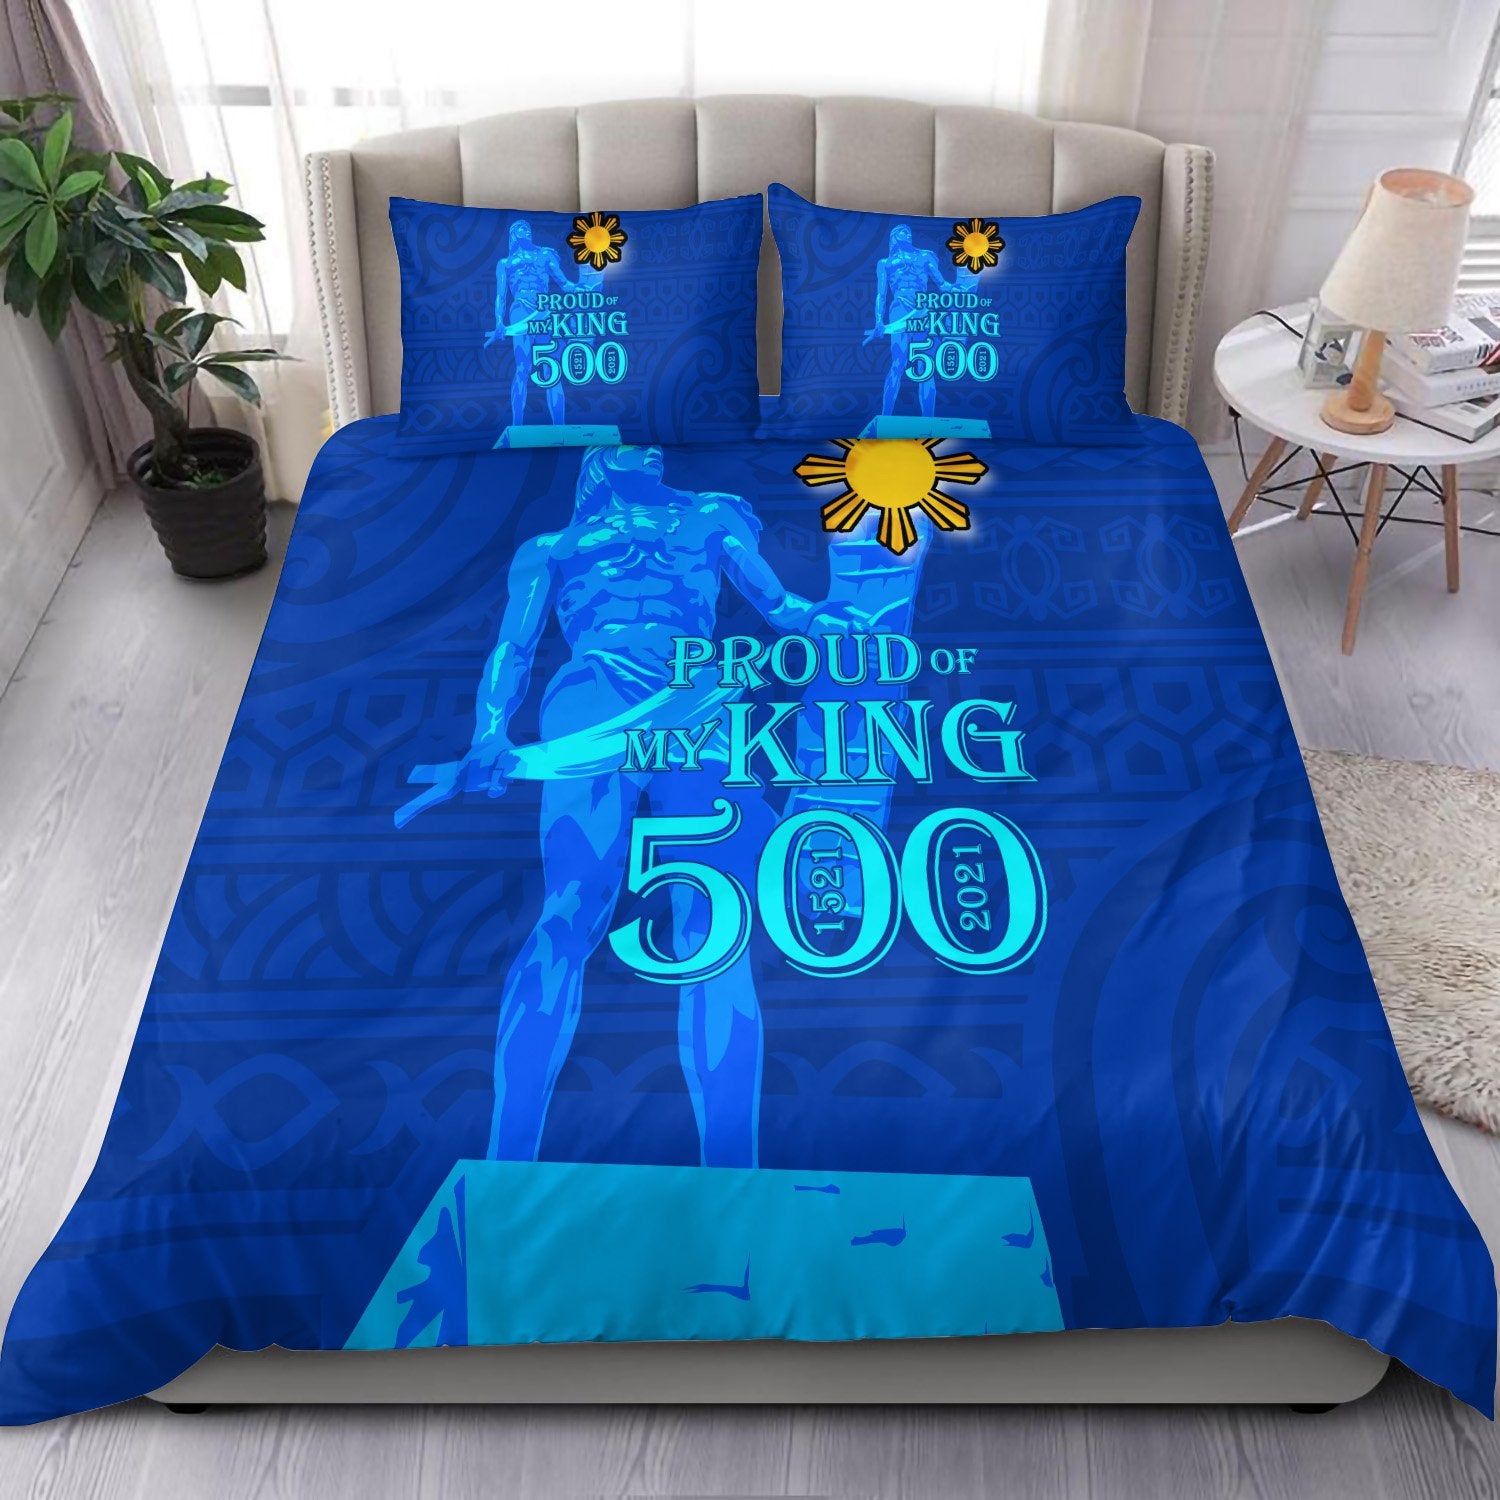 Philippines Bedding Set - Proud Of My King Blue - Polynesian Pride